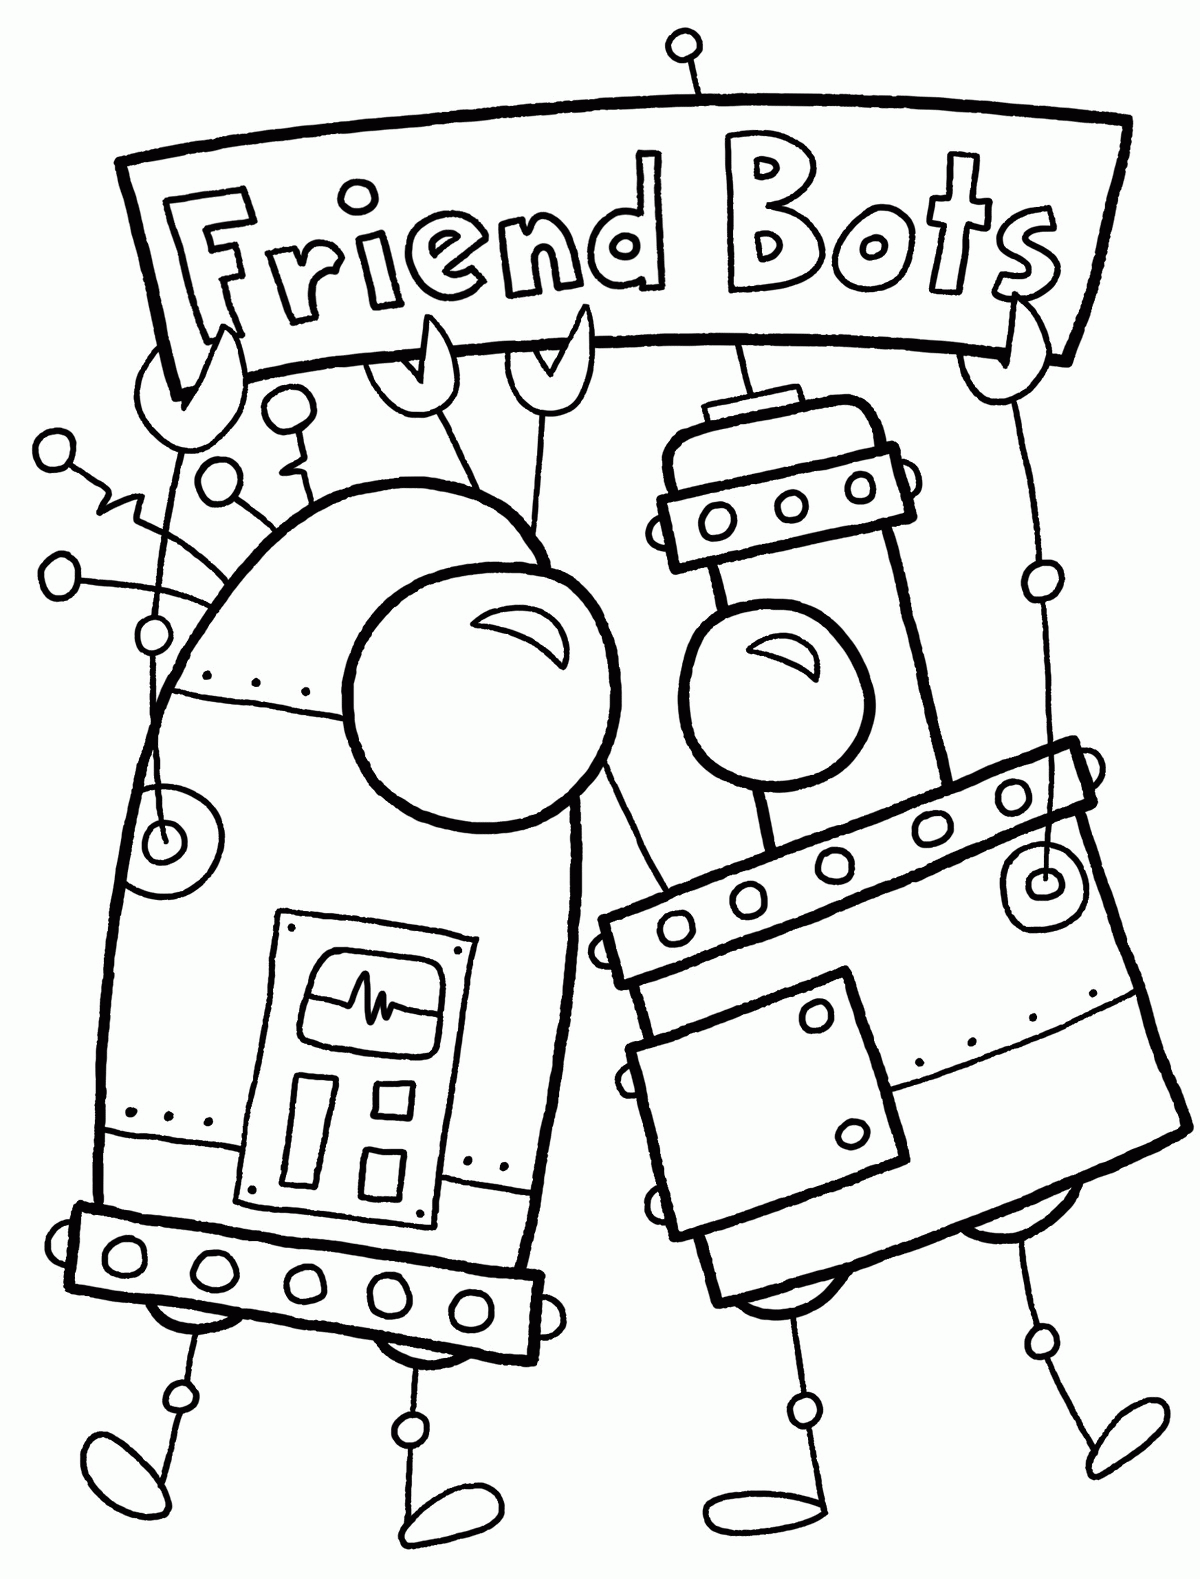 Monitoring Robot Coloring Page - Free Printable Coloring Pages for Kids